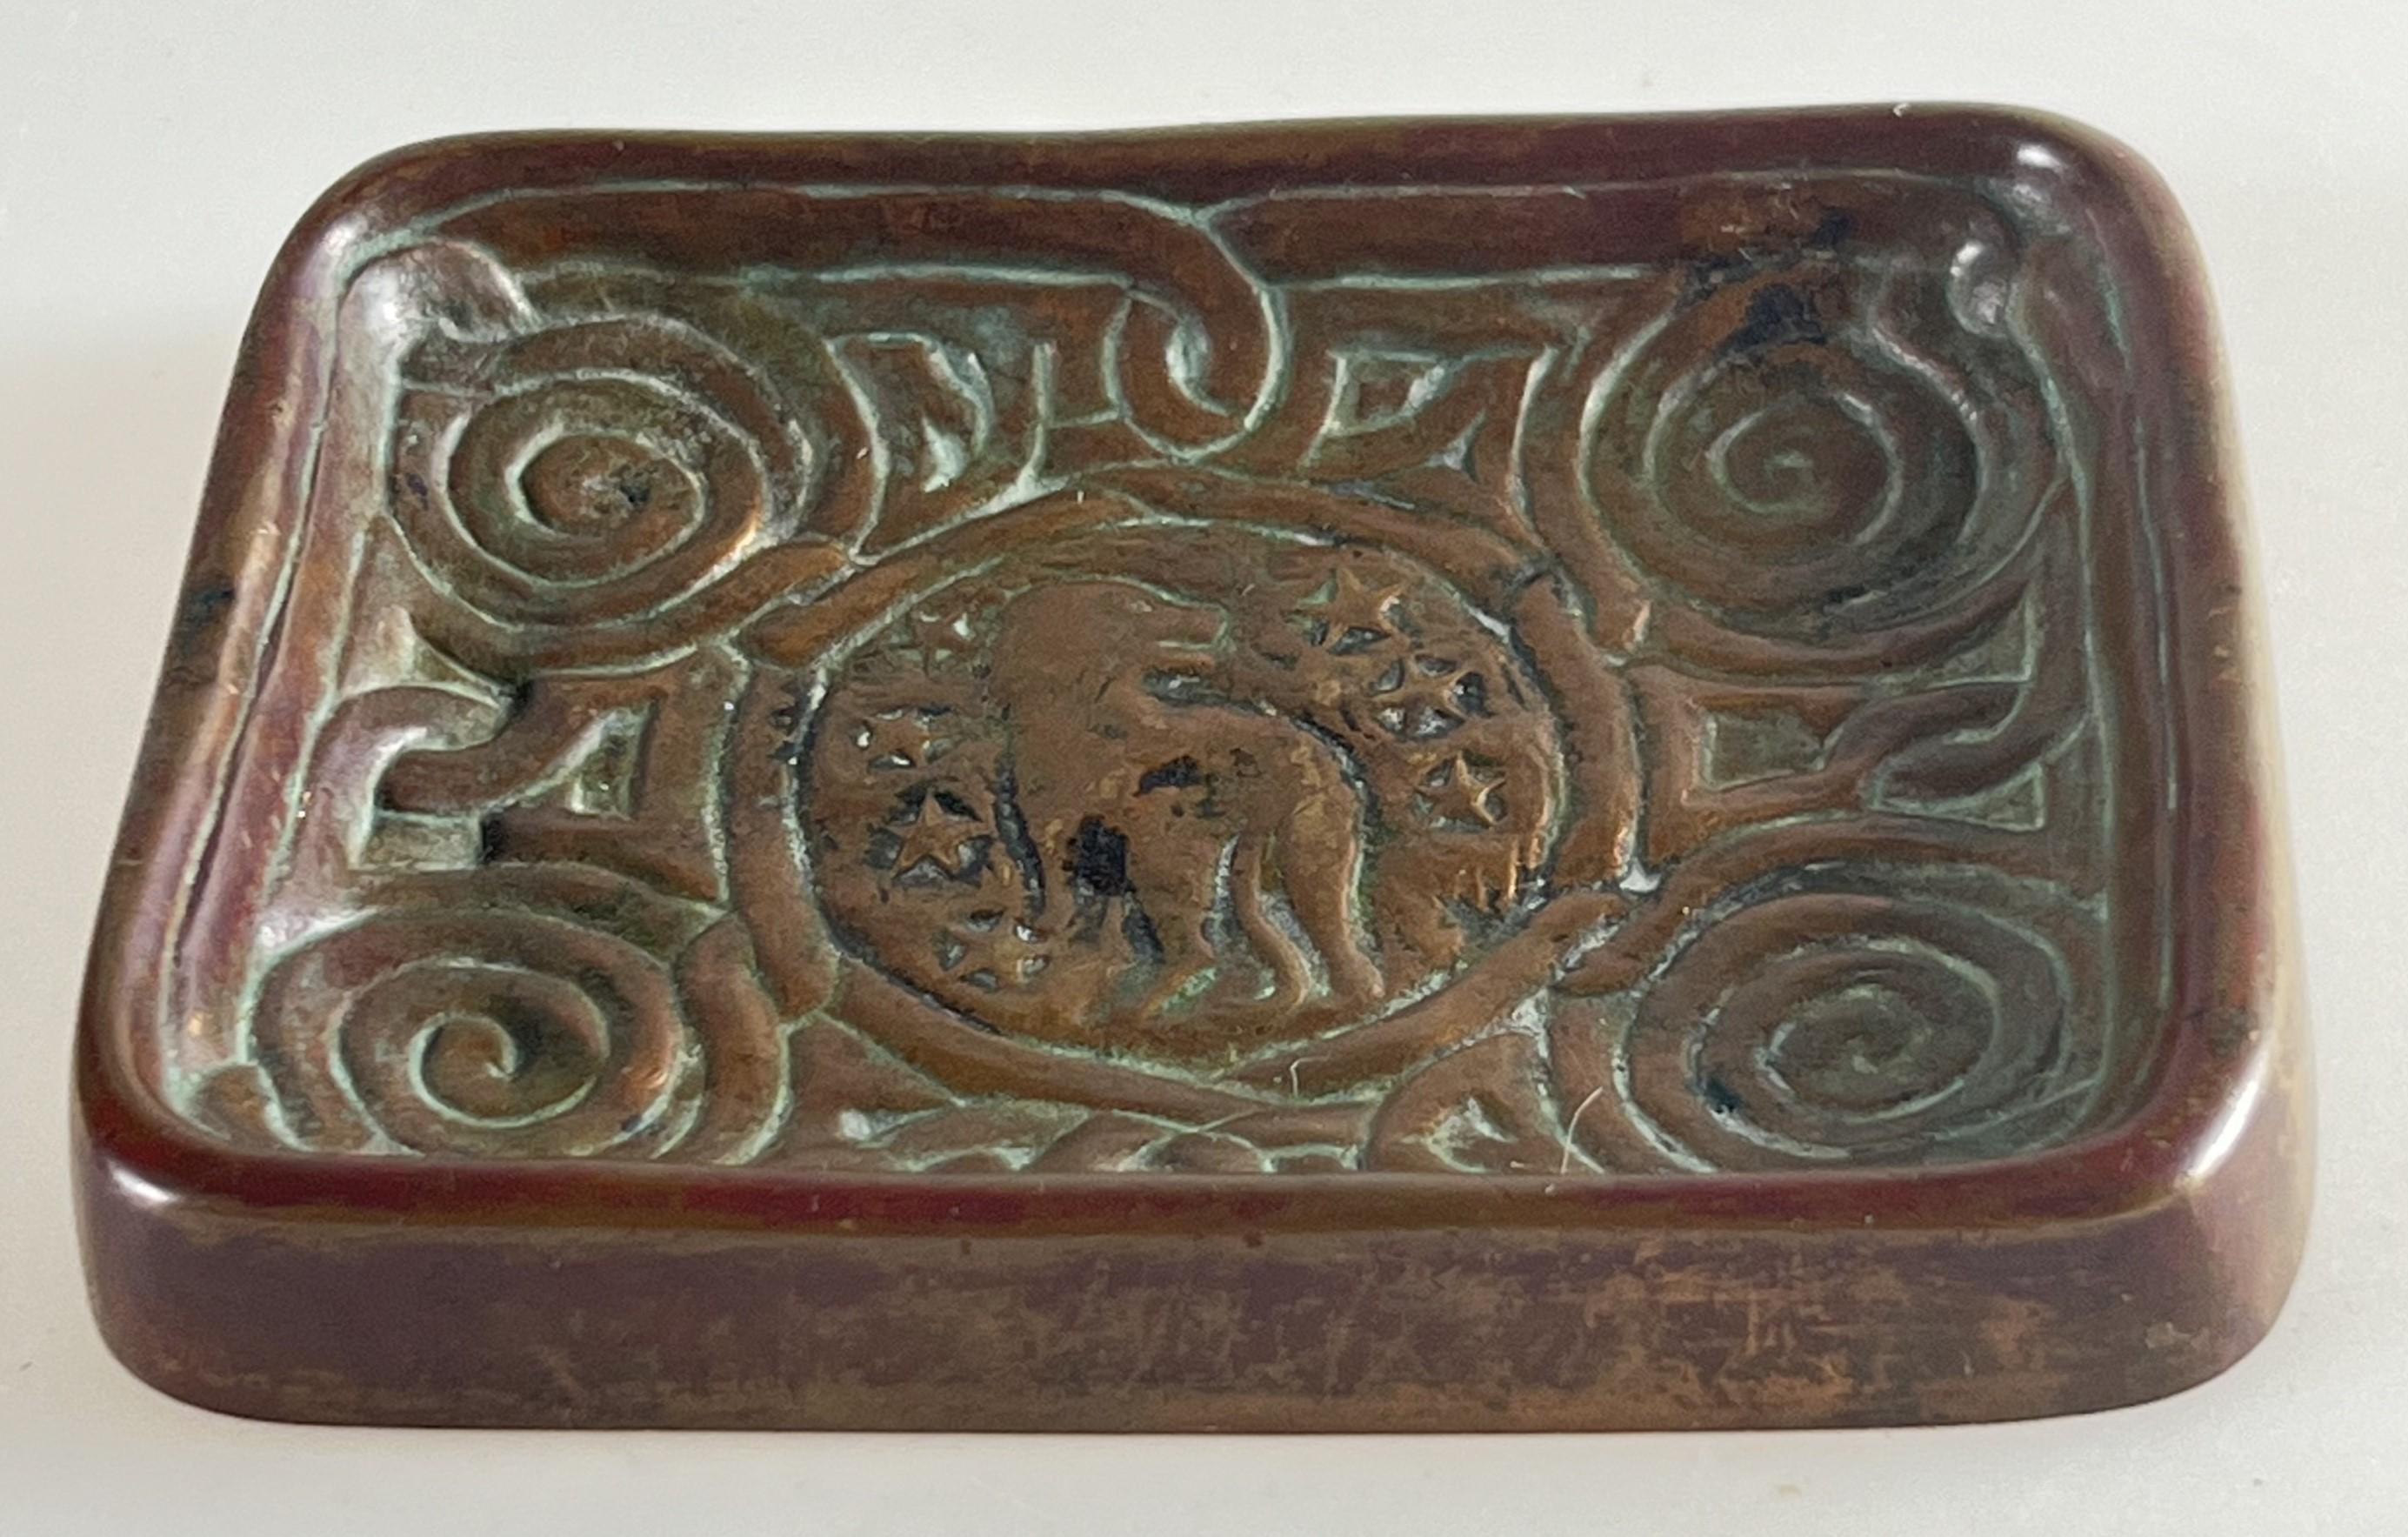 A gorgeous and scarce original Tiffany Studios patinated bronze stamp tray.  A perfect size to use for coins or as a paperweight!  With a stylized lion it's the perfect gift for a LEO or any Tiffany collector.  It retains some of the original patina